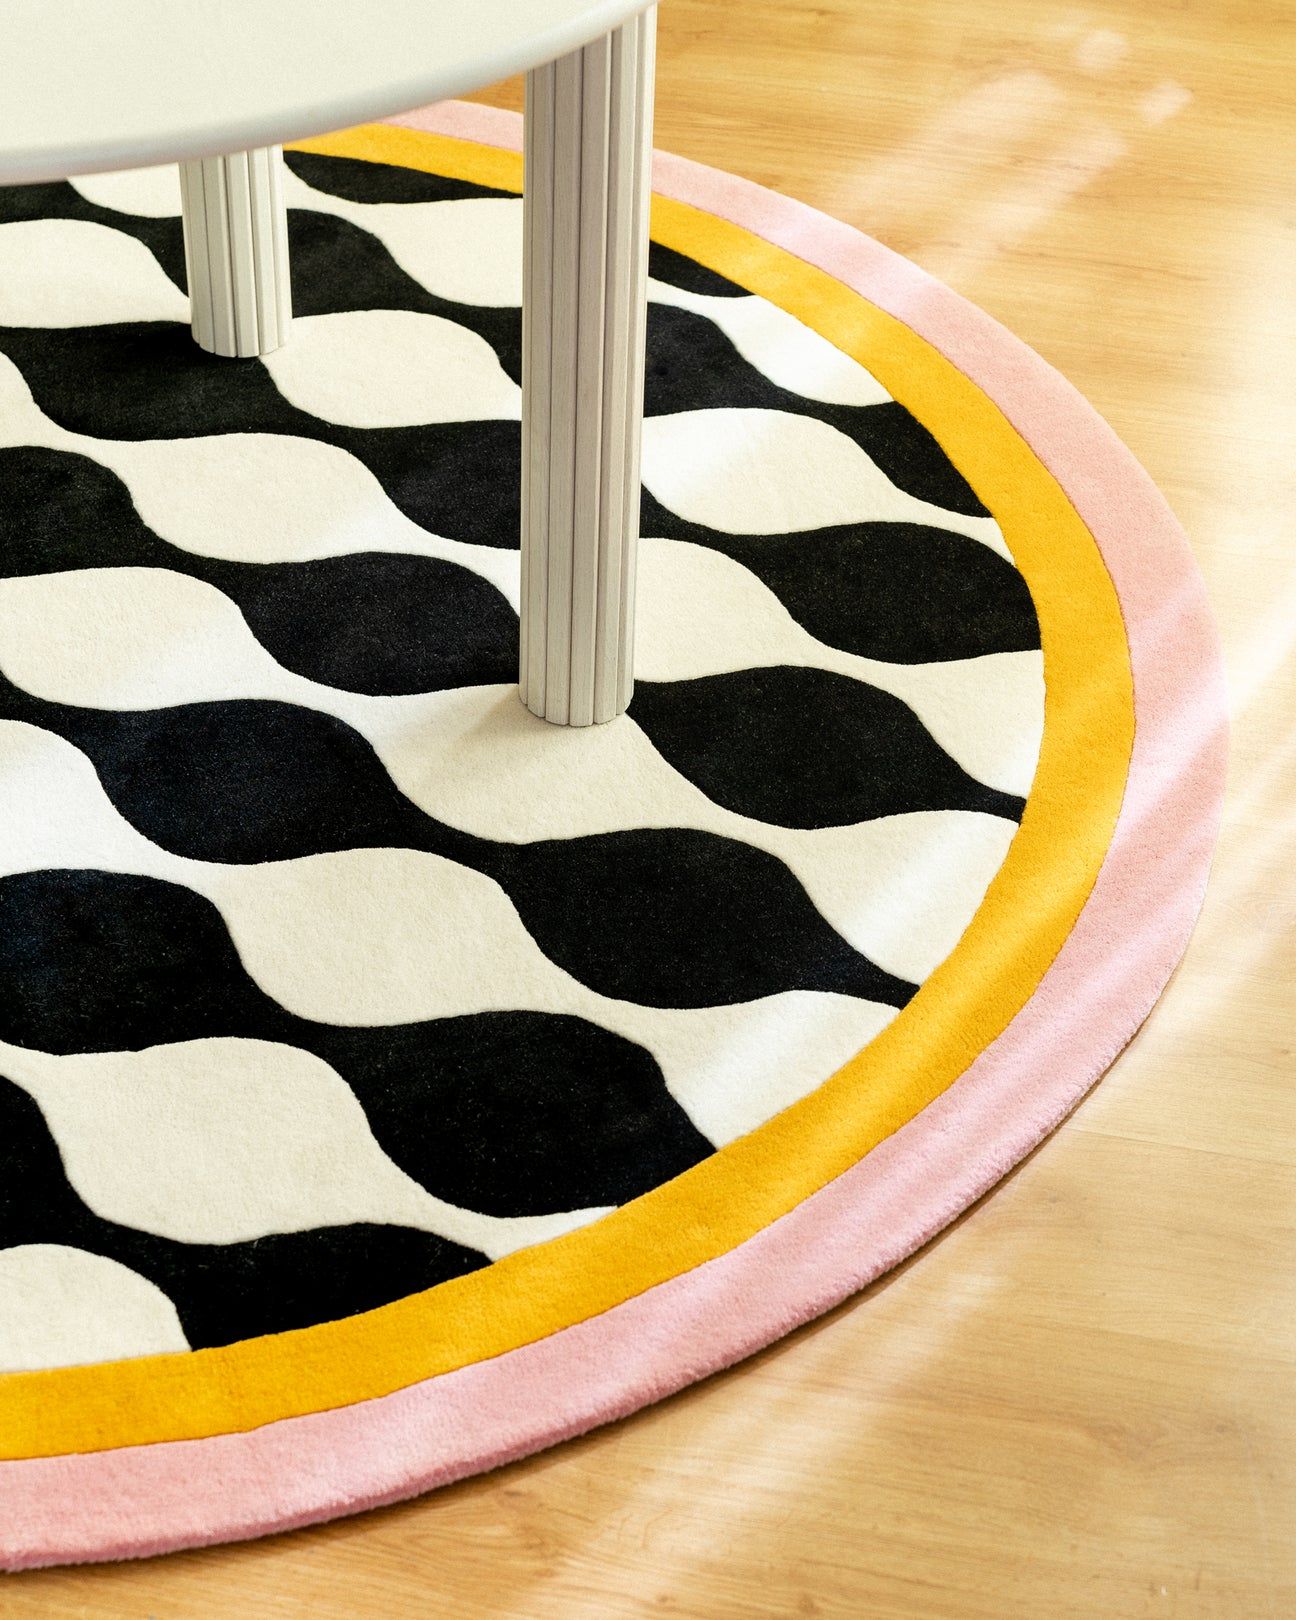 Where can you place your round rugs?